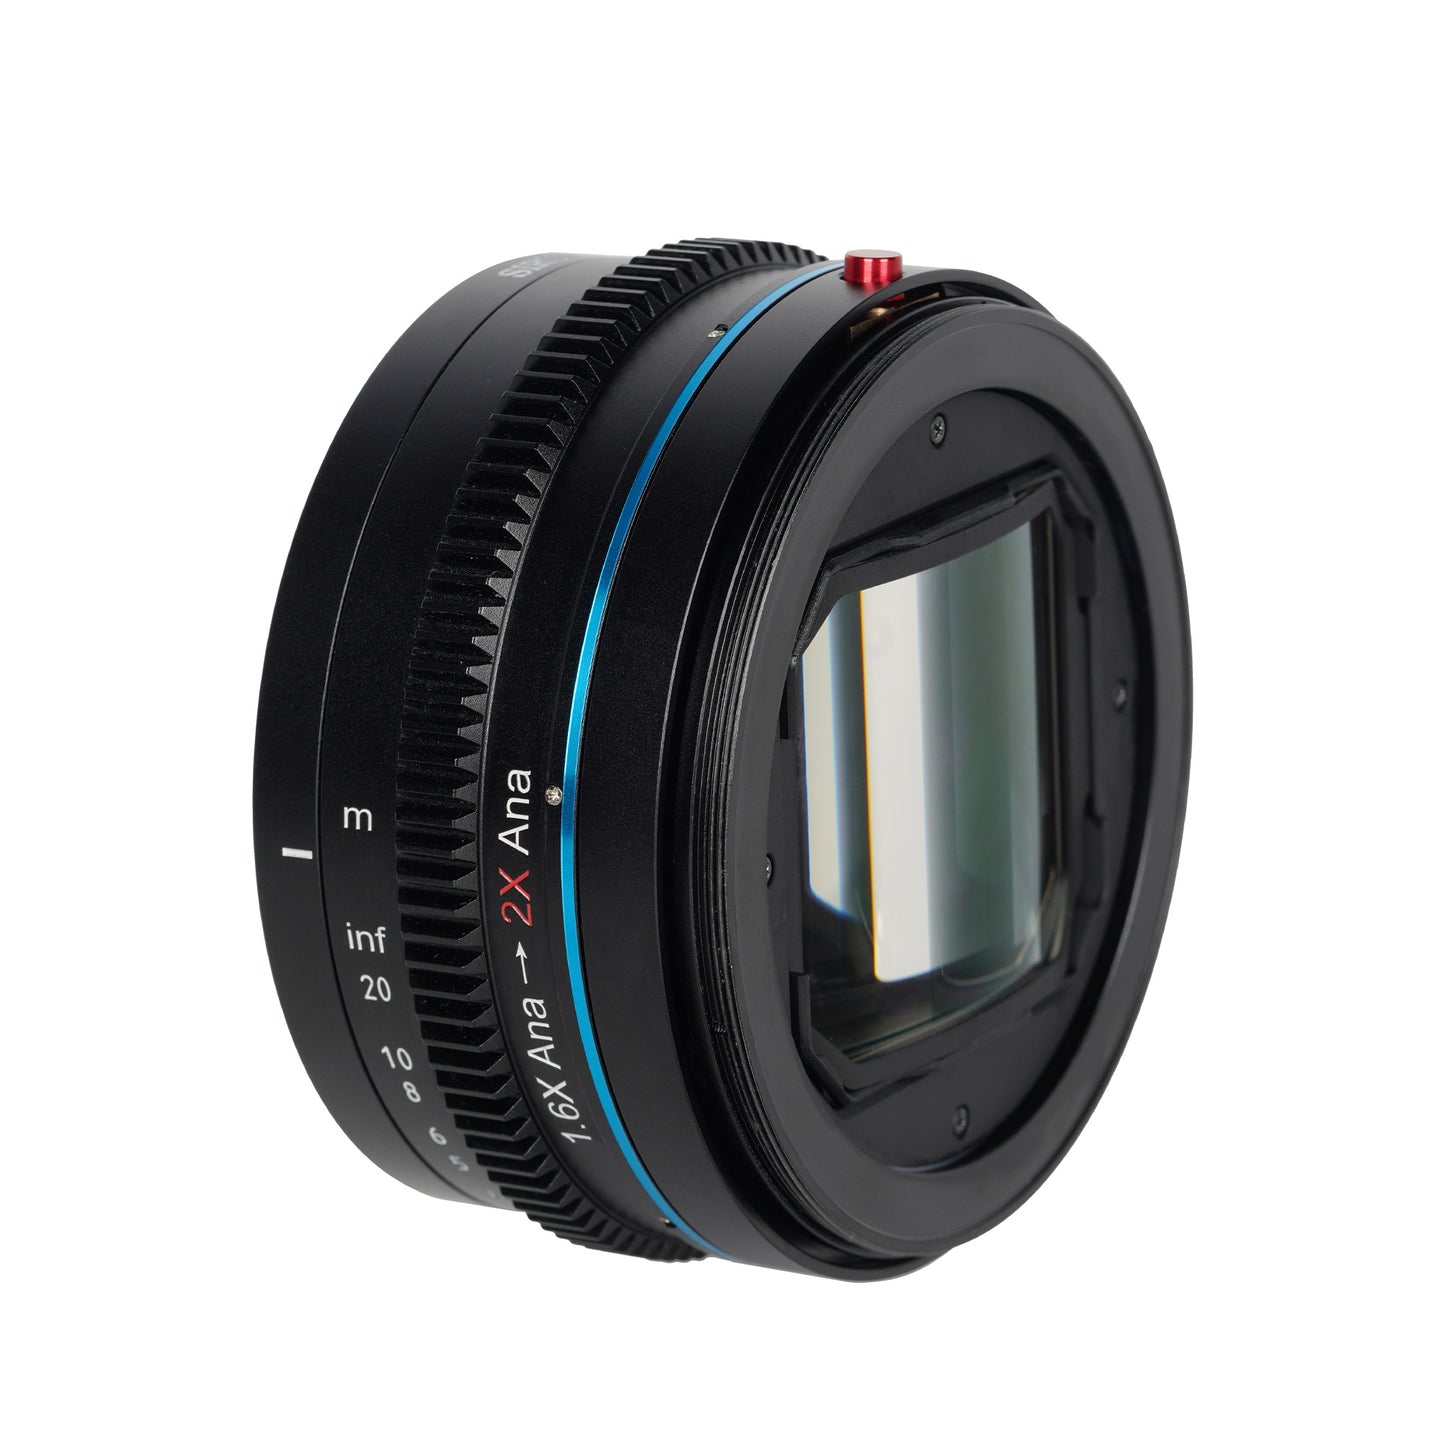 SIRUI ADP125X Anamorphic Adapter 1.25x for spherical and anamorphic lenses